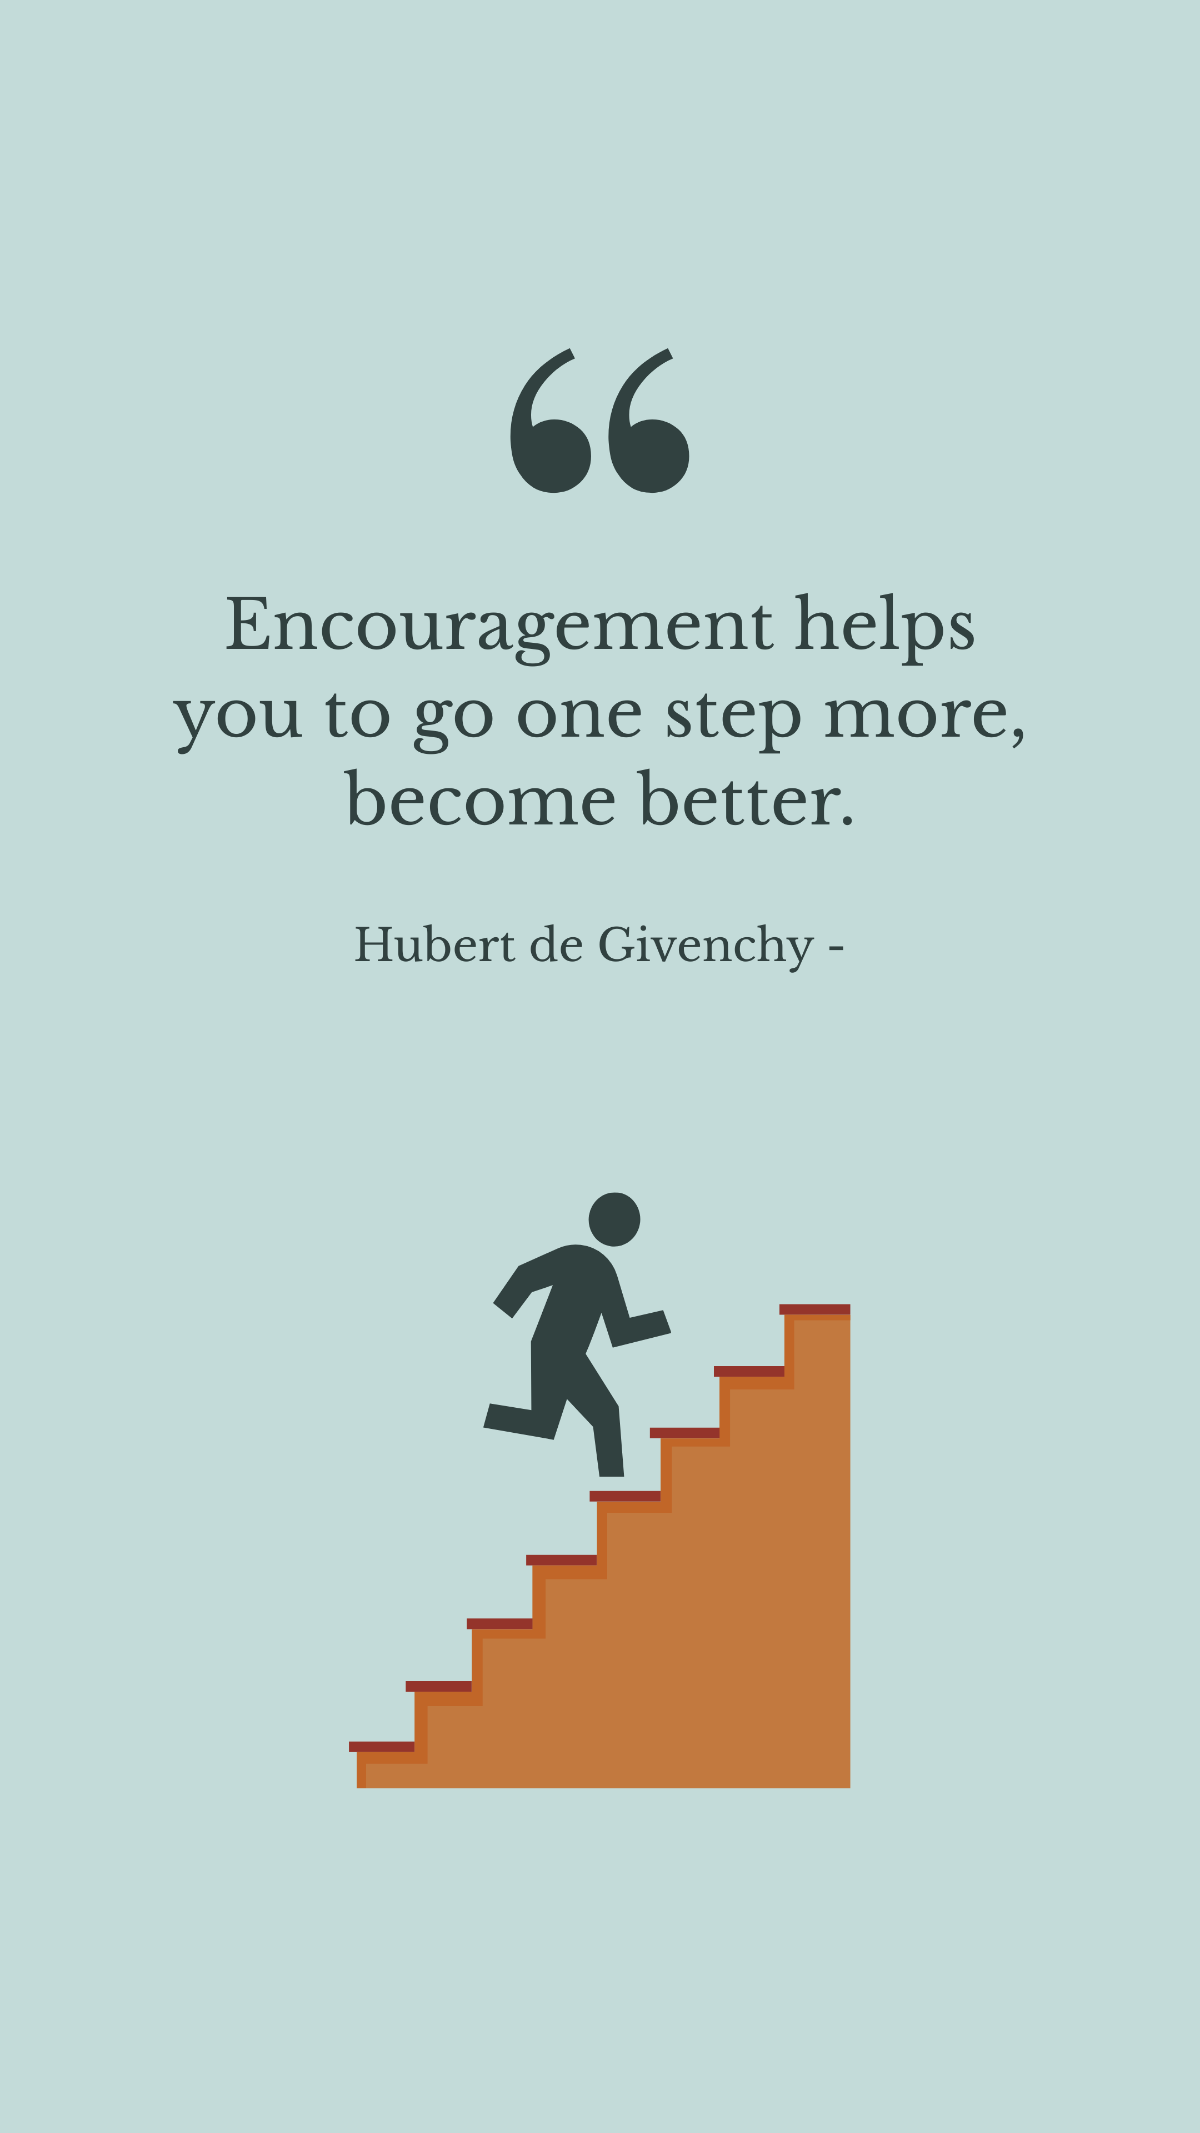 Free Hubert de Givenchy - Encouragement helps you to go one step more, become better. Template